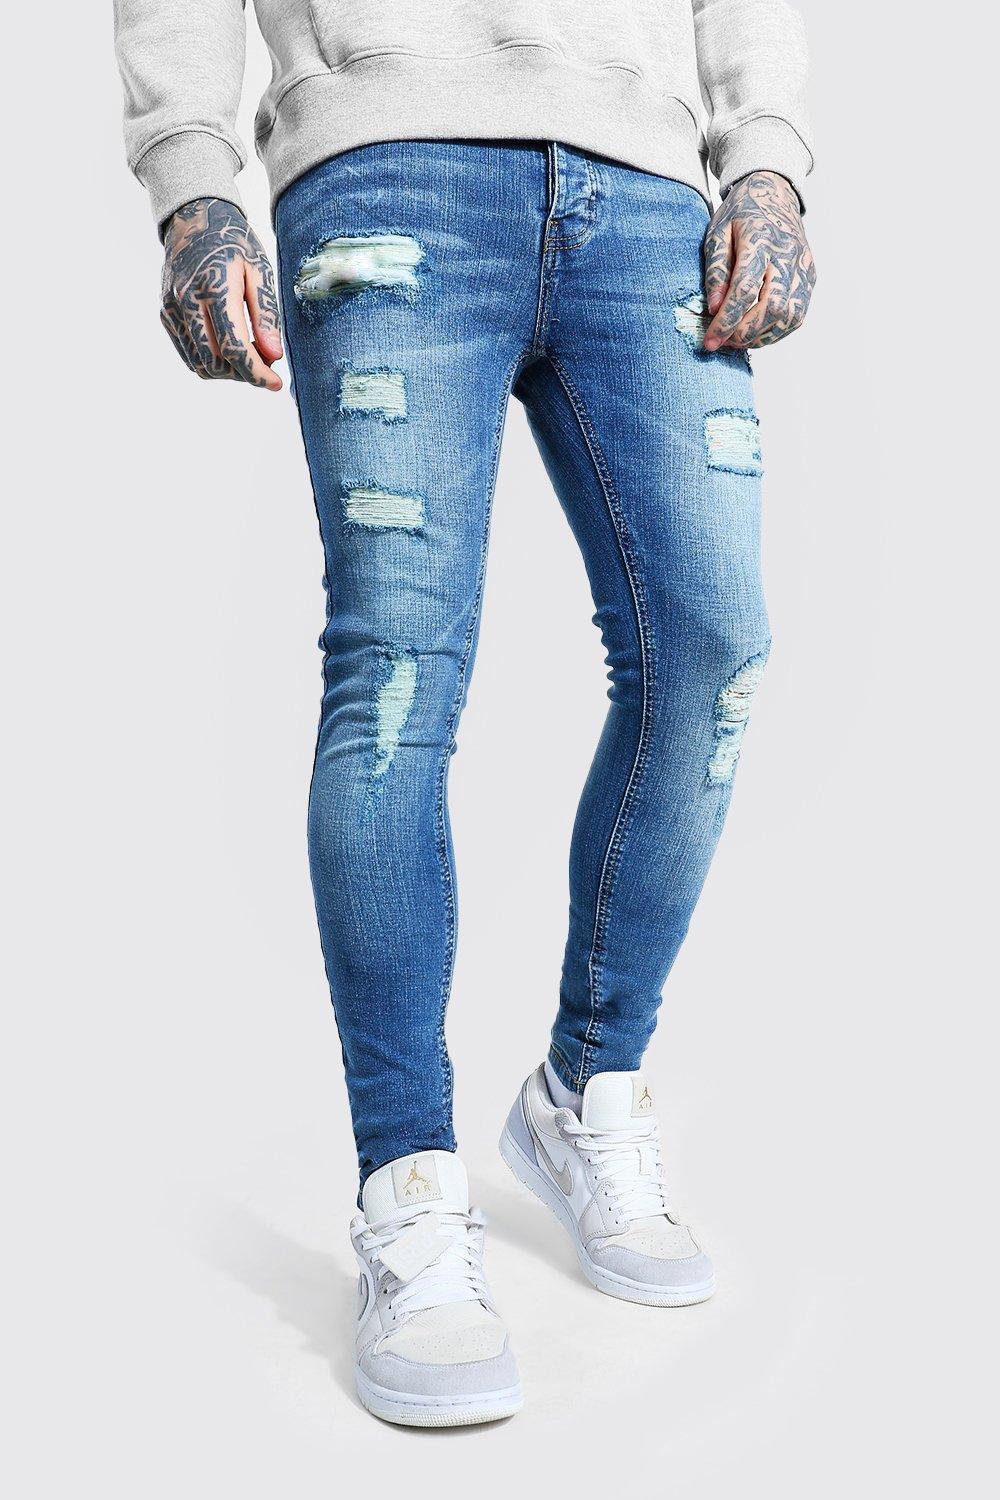 boohoo mens ripped jeans